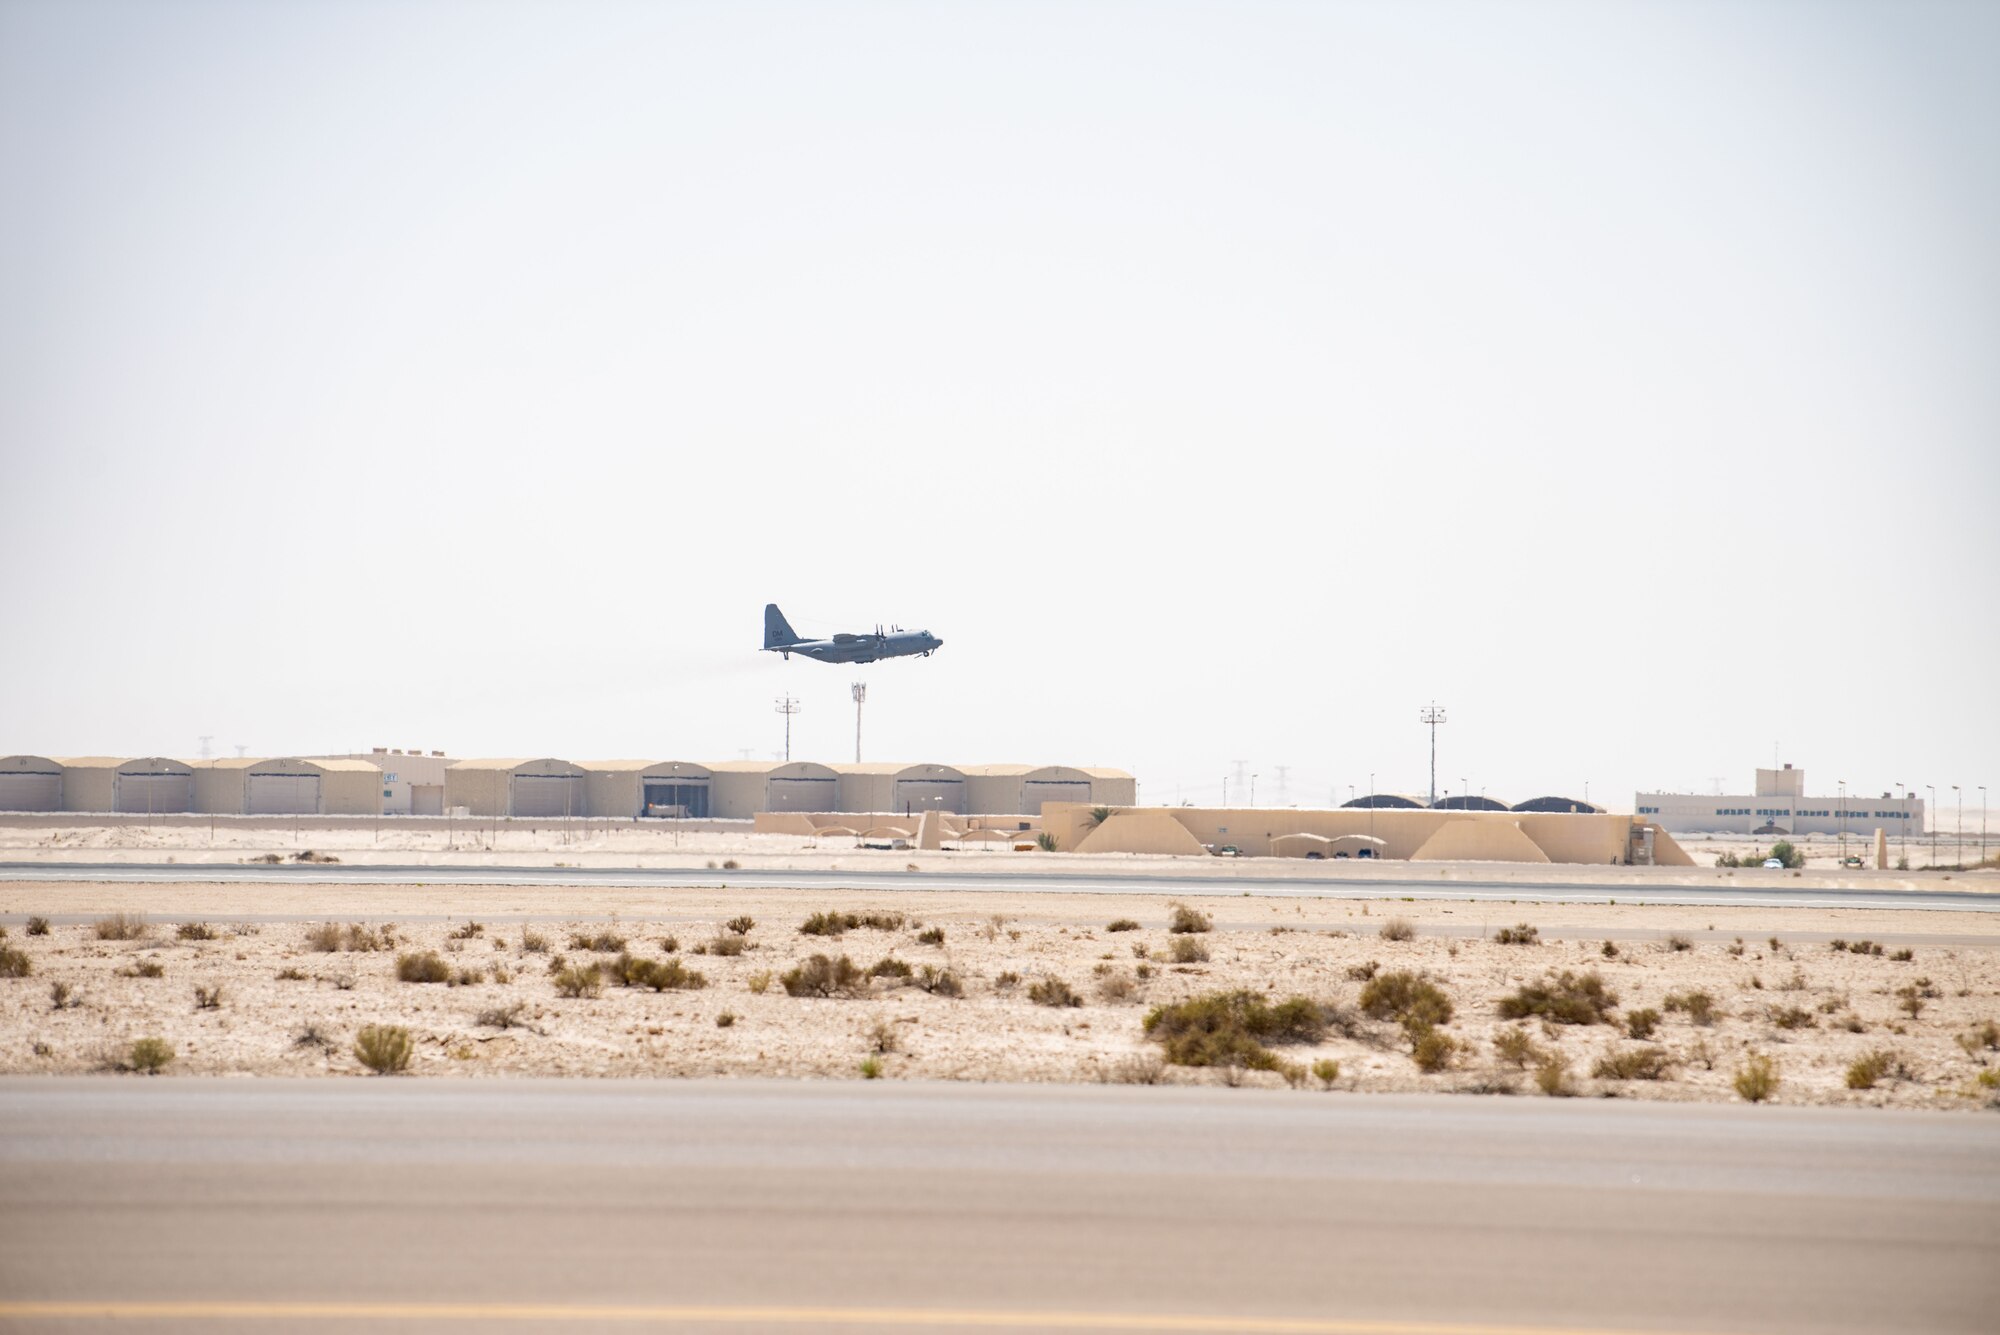 A U.S. Air Force EC-130H Compass Call takes off